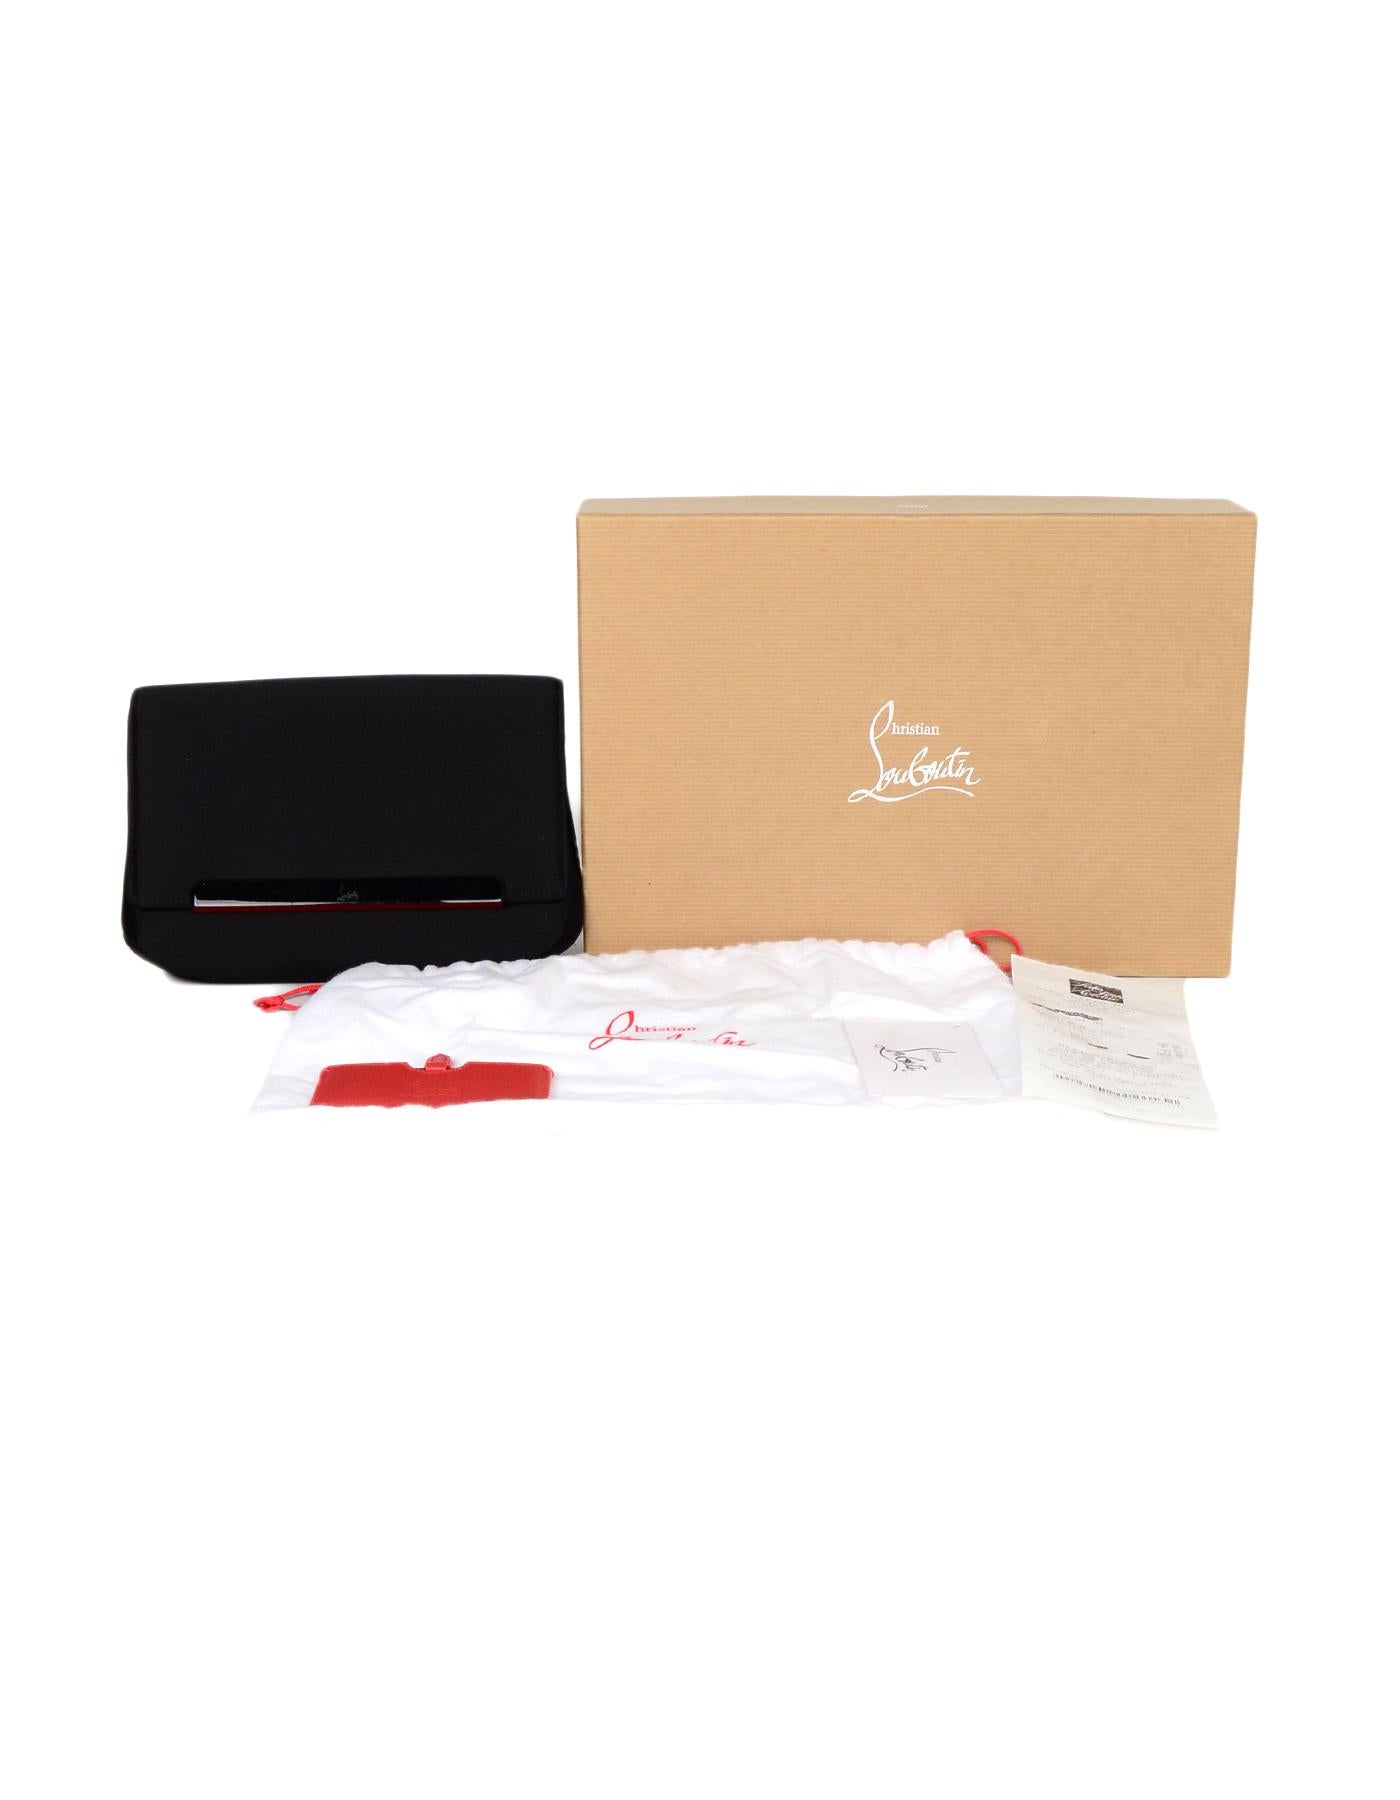 Christian Louboutin Black Satin Small Rougissime Clutch Bag

Made In: Italy
Color: Black
Hardware: Black, red
Materials: Satin, metal
Lining: Red satin 
Closure/Opening: Flap top with magnetic closure
Exterior Pockets: Rear magnetic pocket
Interior